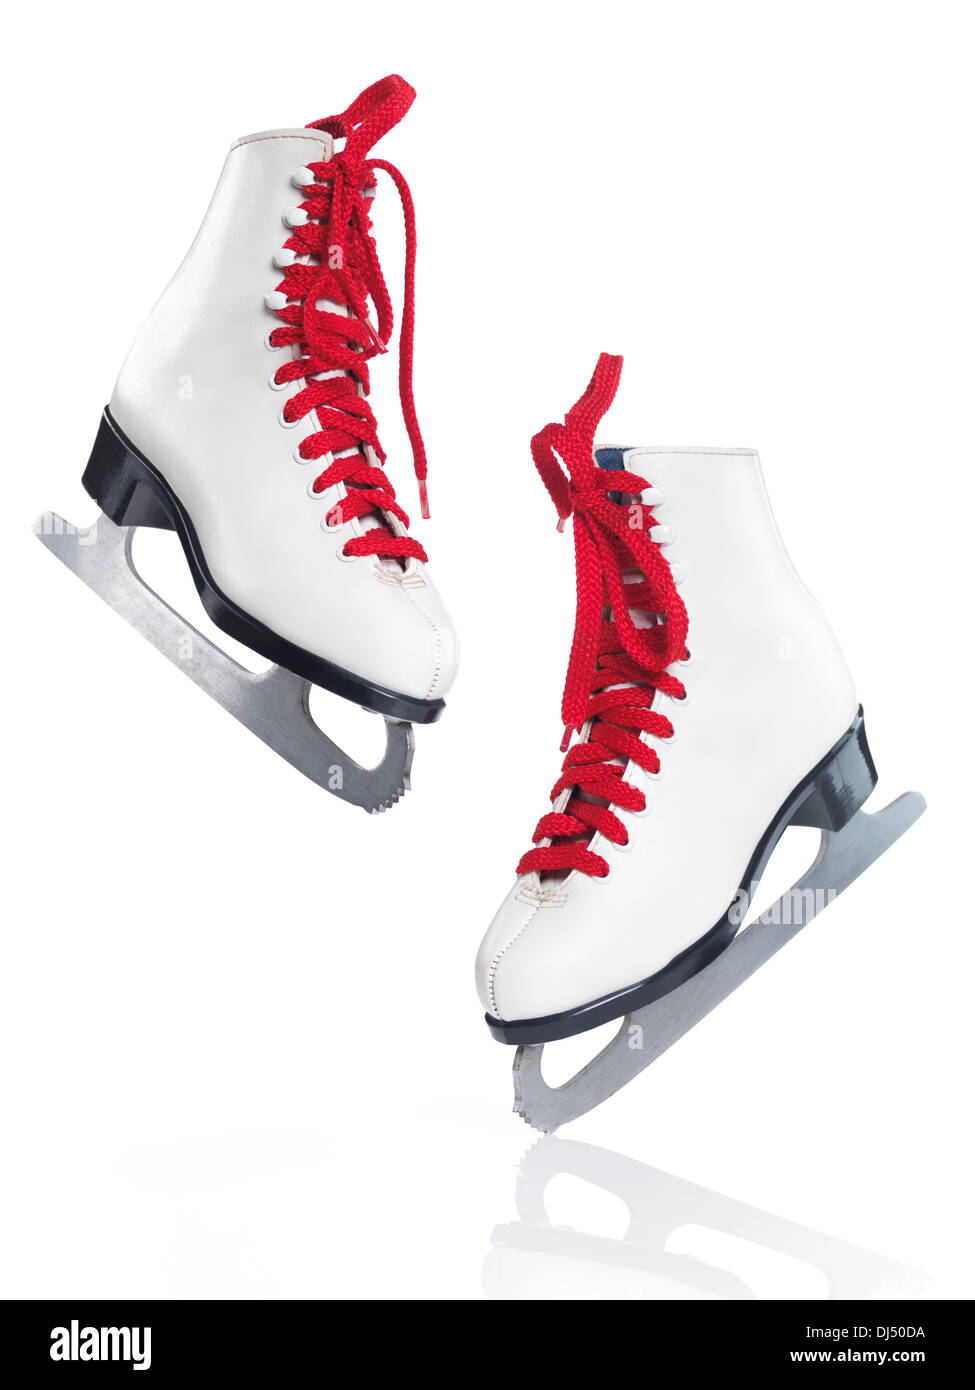 White ice skates with red laces artistic still life isolated on white background Stock Photo